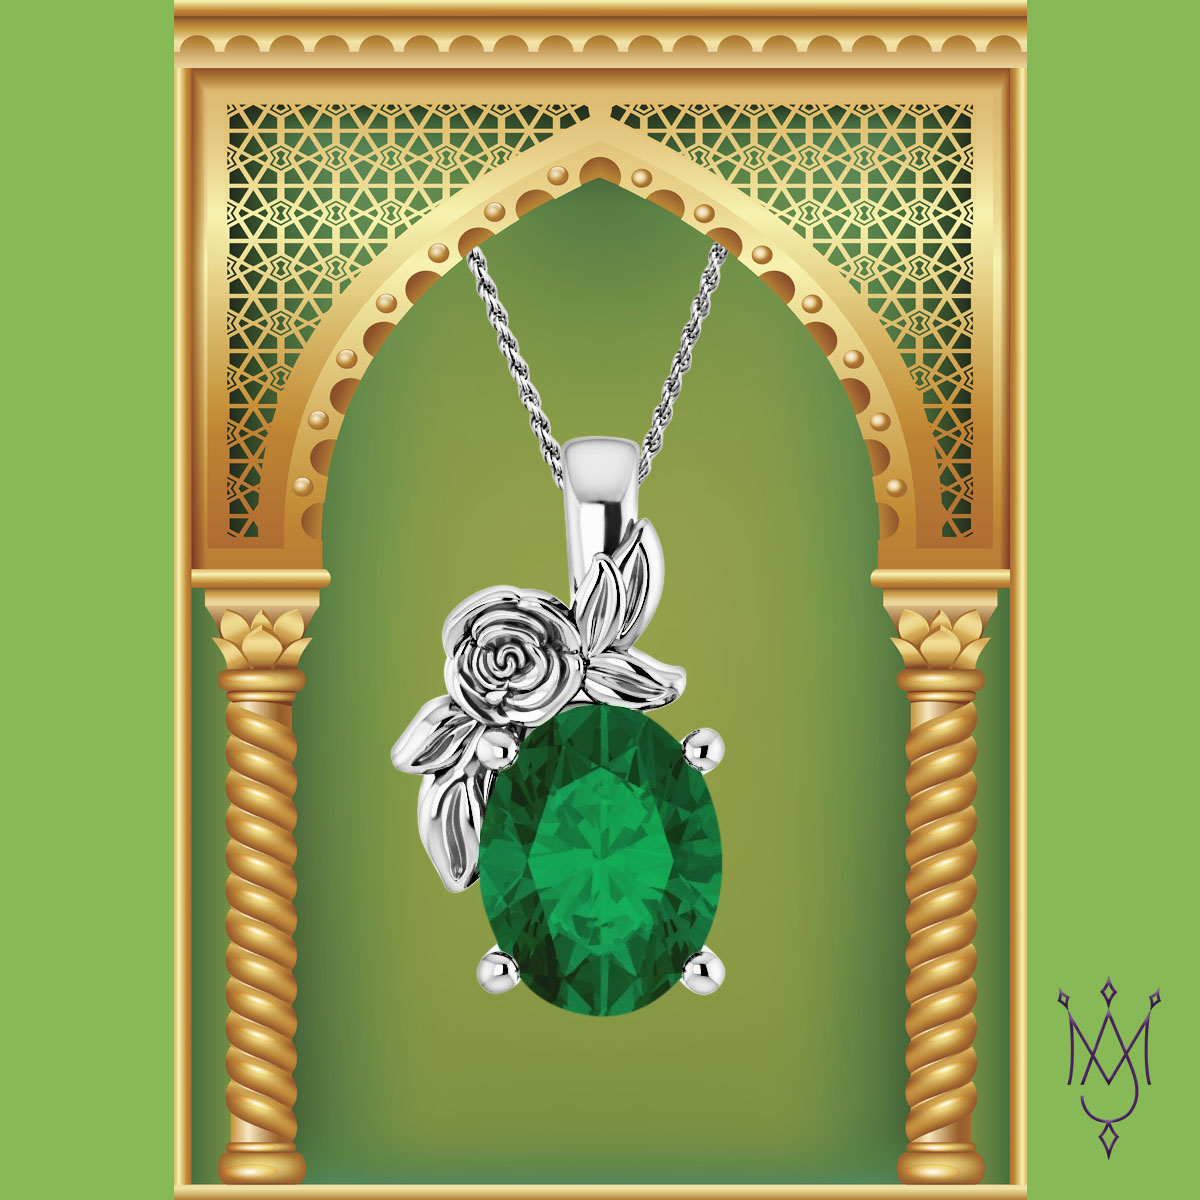 The Crystal Rose Pendant: Emerald Edition, featured here in 18k White Gold. Available now for the May born Queens!
#MonarchyJewels #EmeraldJewelry #BirthstoneJewelry #MayBirthstone #Emeralds #Gold